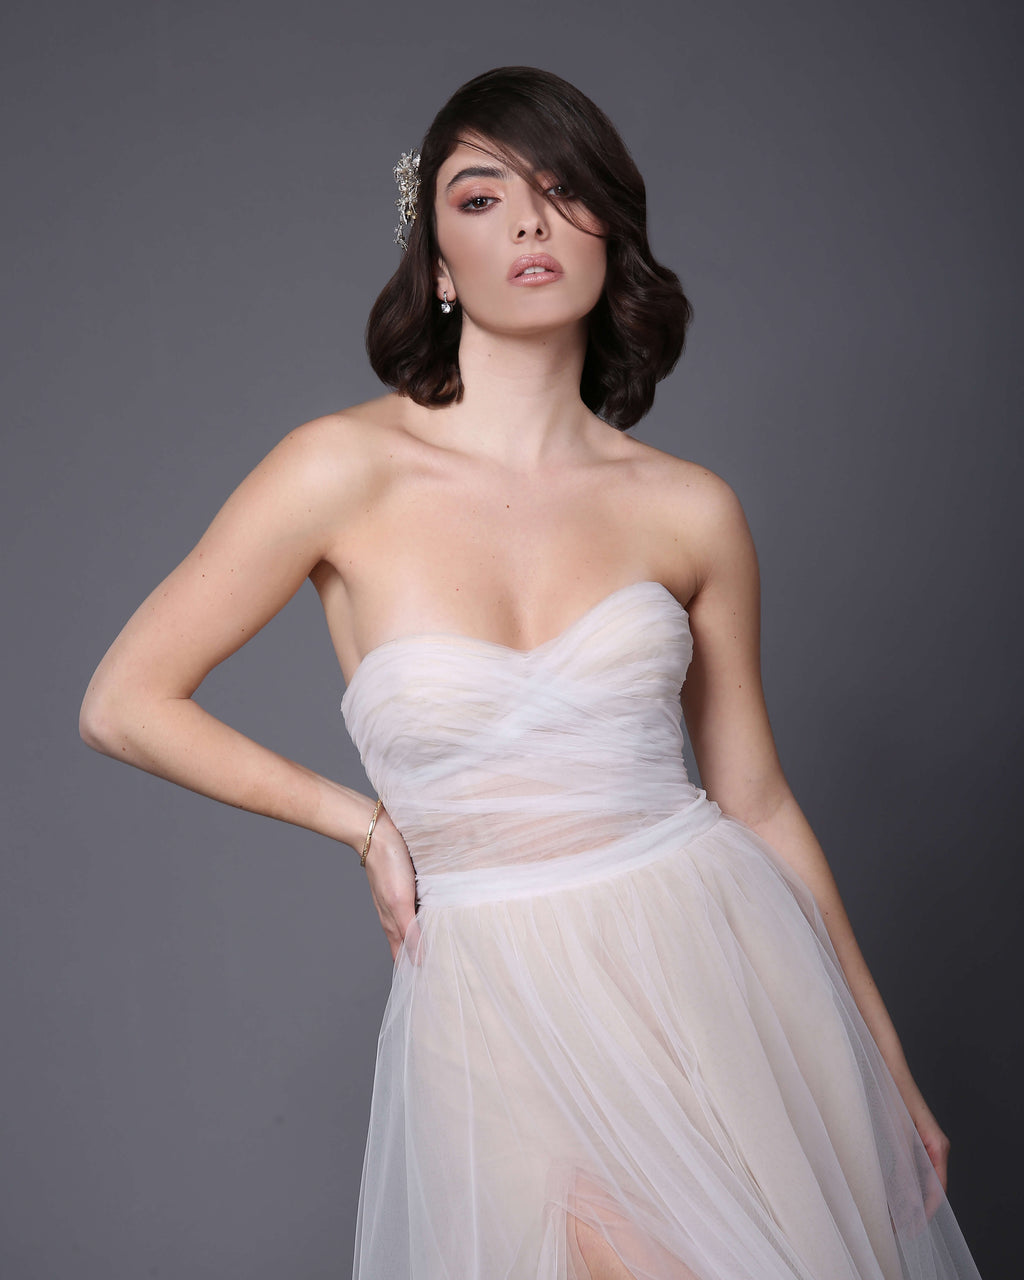 ELZA – Wedding dress with corset and tulle skirt.